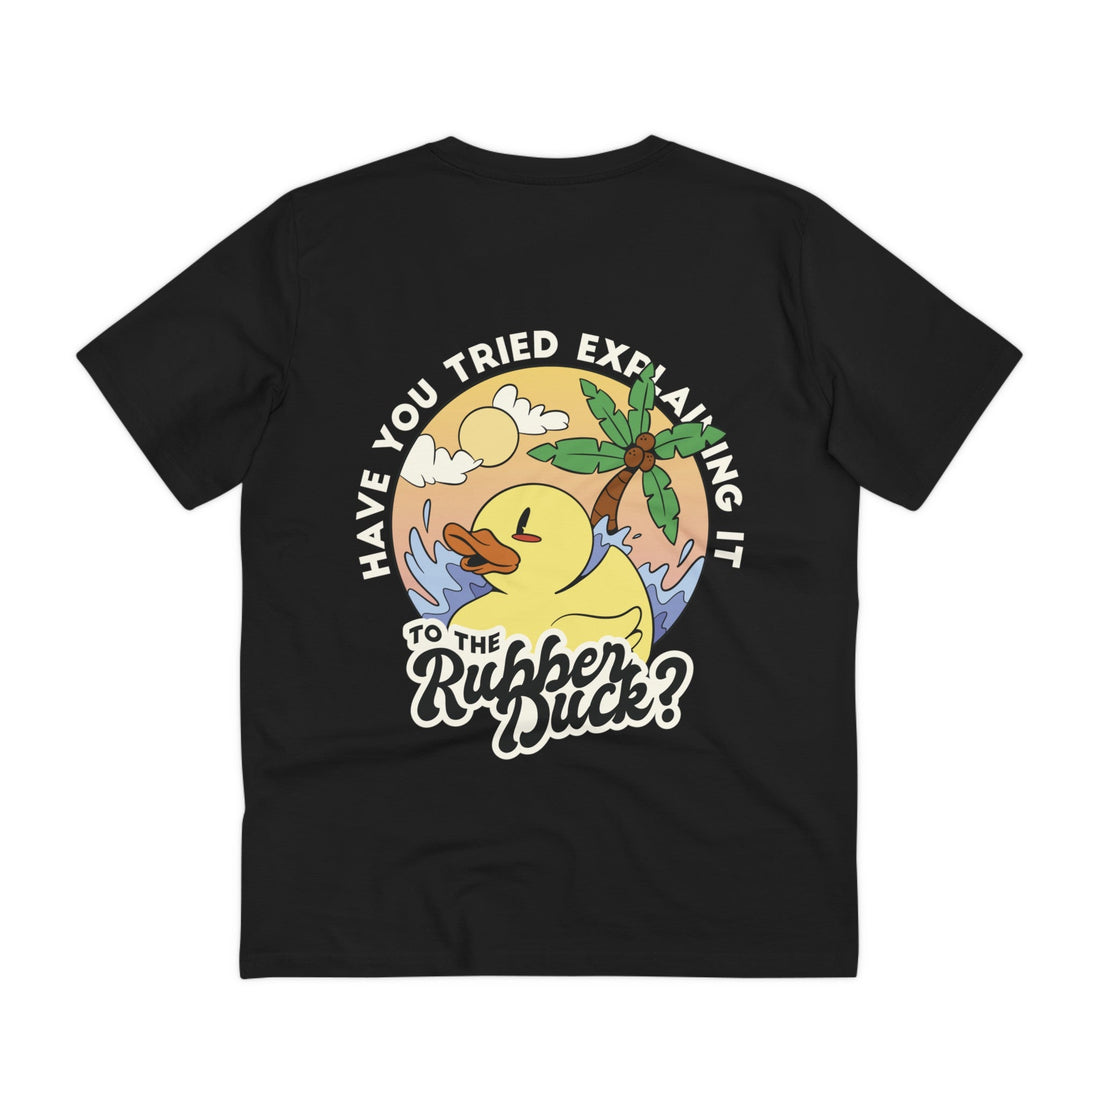 Printify T-Shirt Black / 2XS Have you tried explaining it to the Rubber Duck? - Rubber Duck - Back Design